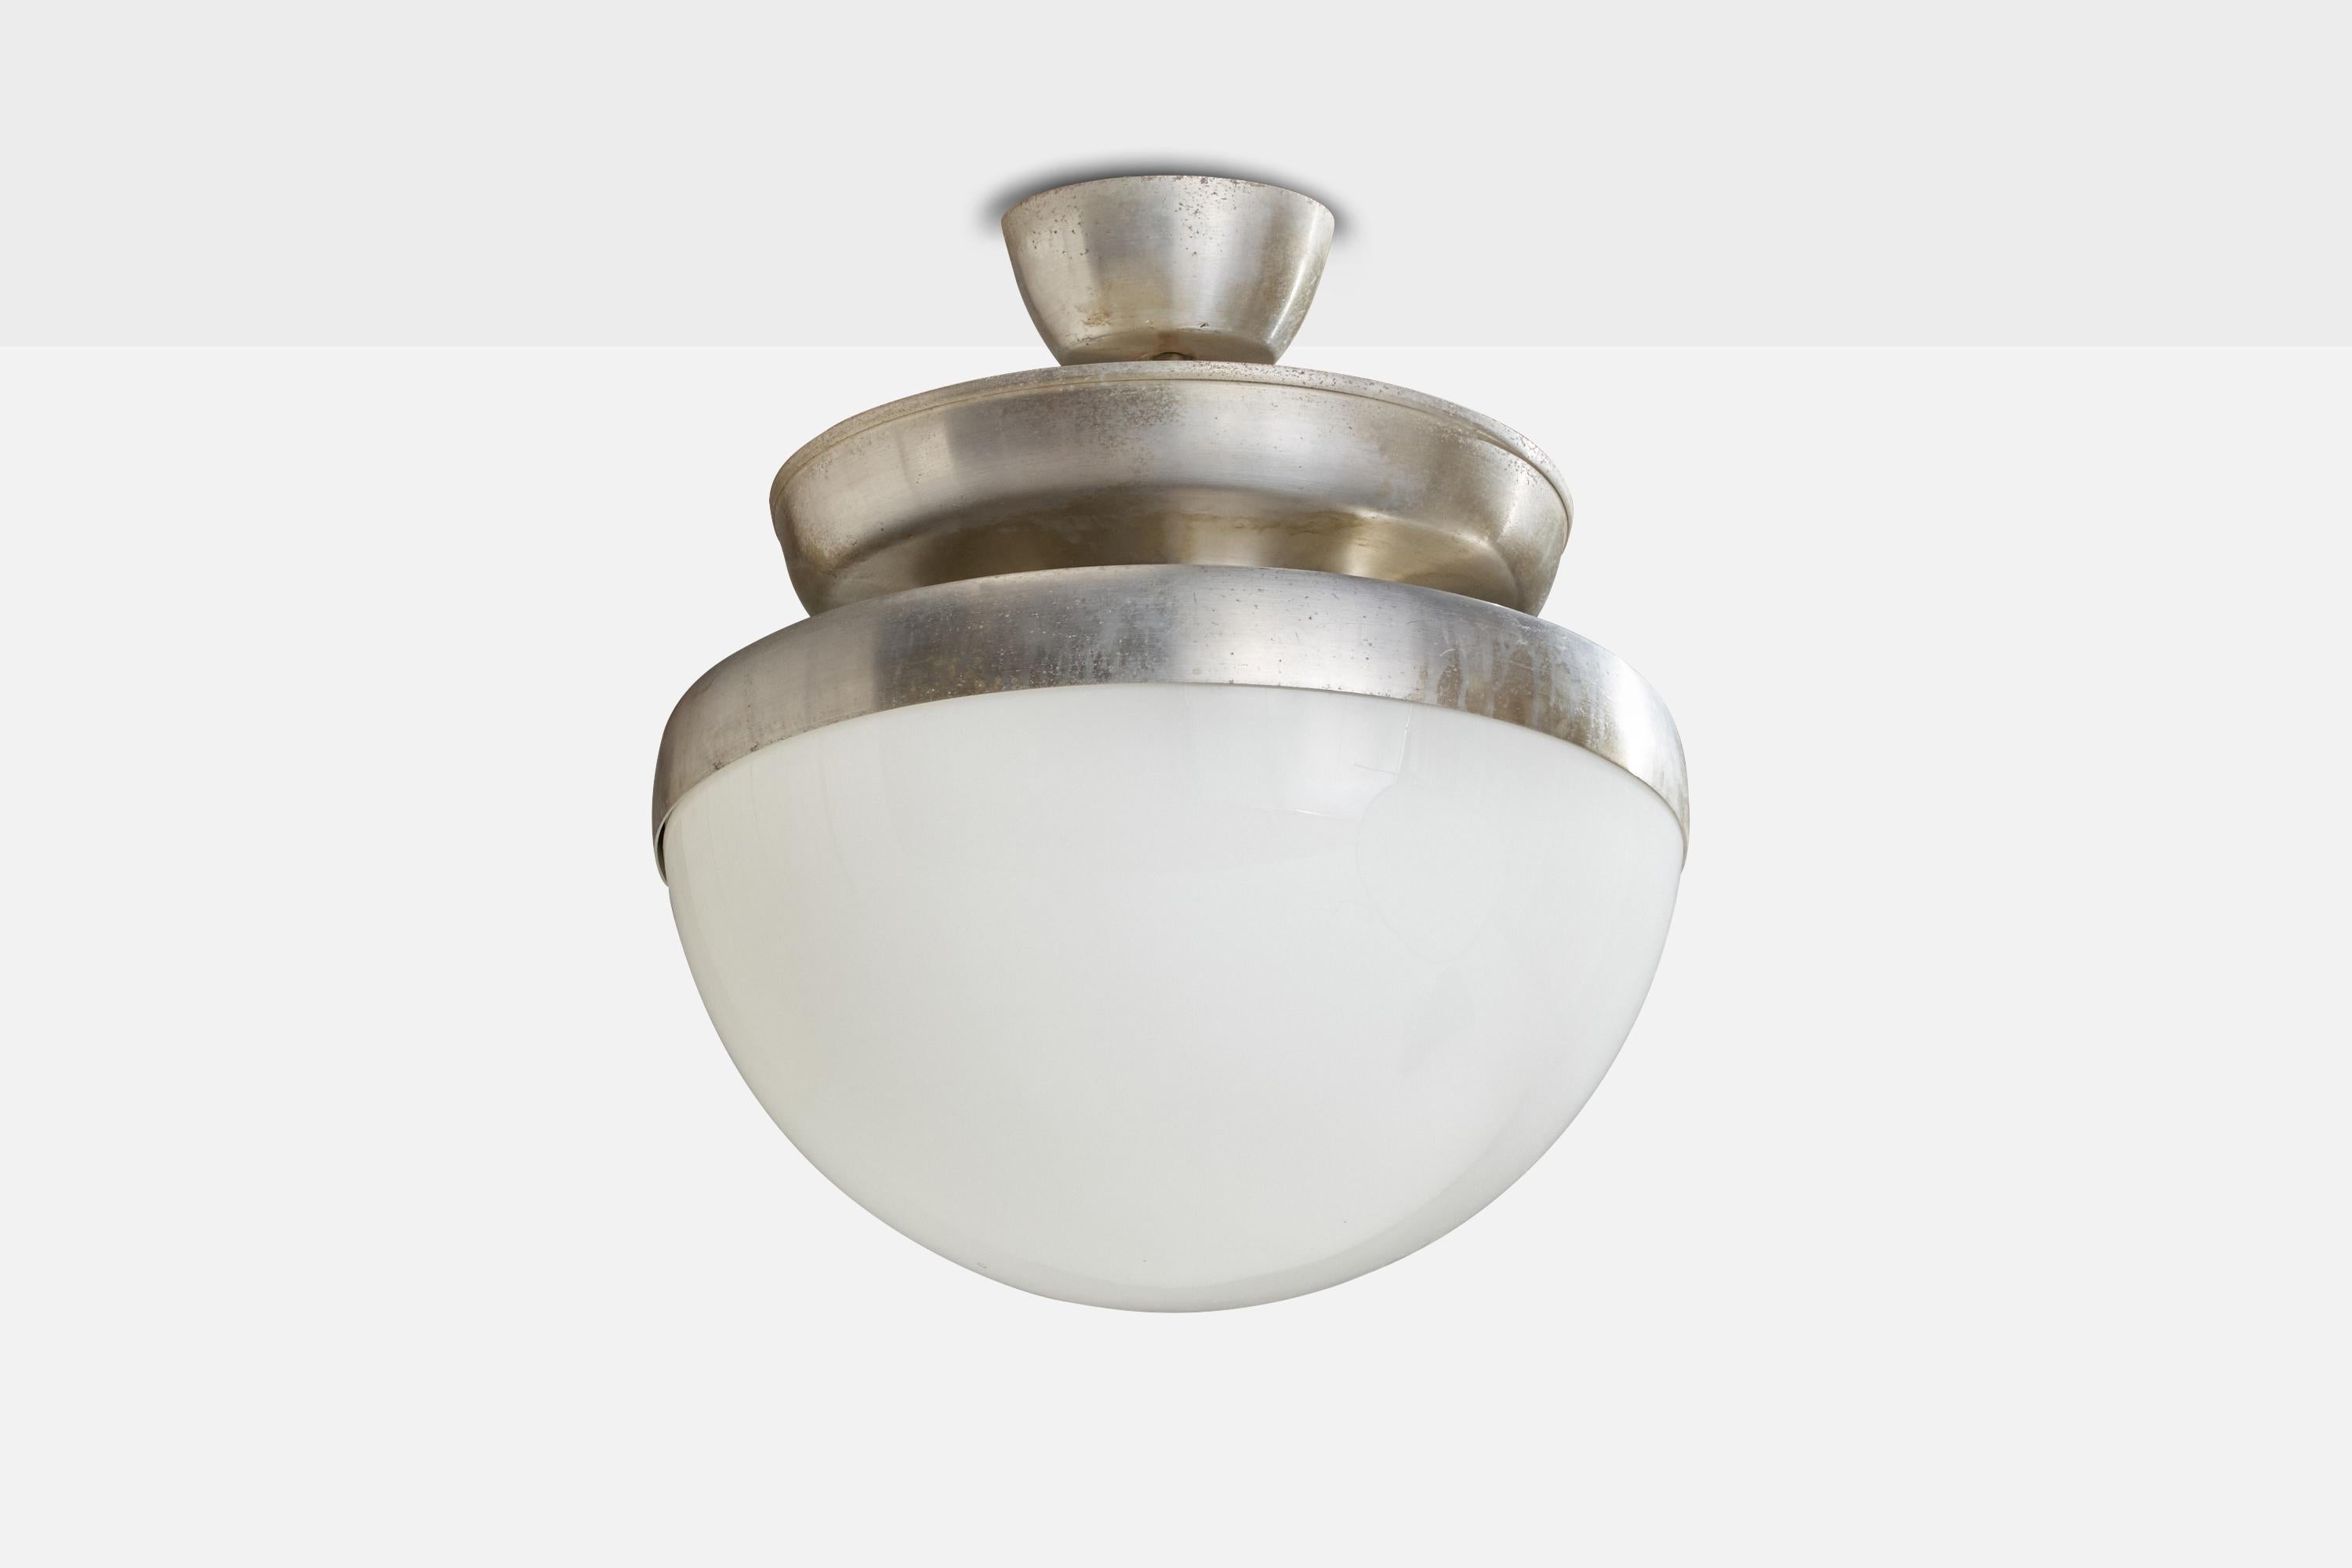 A metal and opline glass pendant designed by Pia Crippa Guidetti and produced by Lumi Milano, Italy, c. 1960.

Dimensions of canopy (inches): 2.75” H x 5.75” Diameter
Socket takes standard E-26 bulbs. 2 sockets.There is no maximum wattage stated on